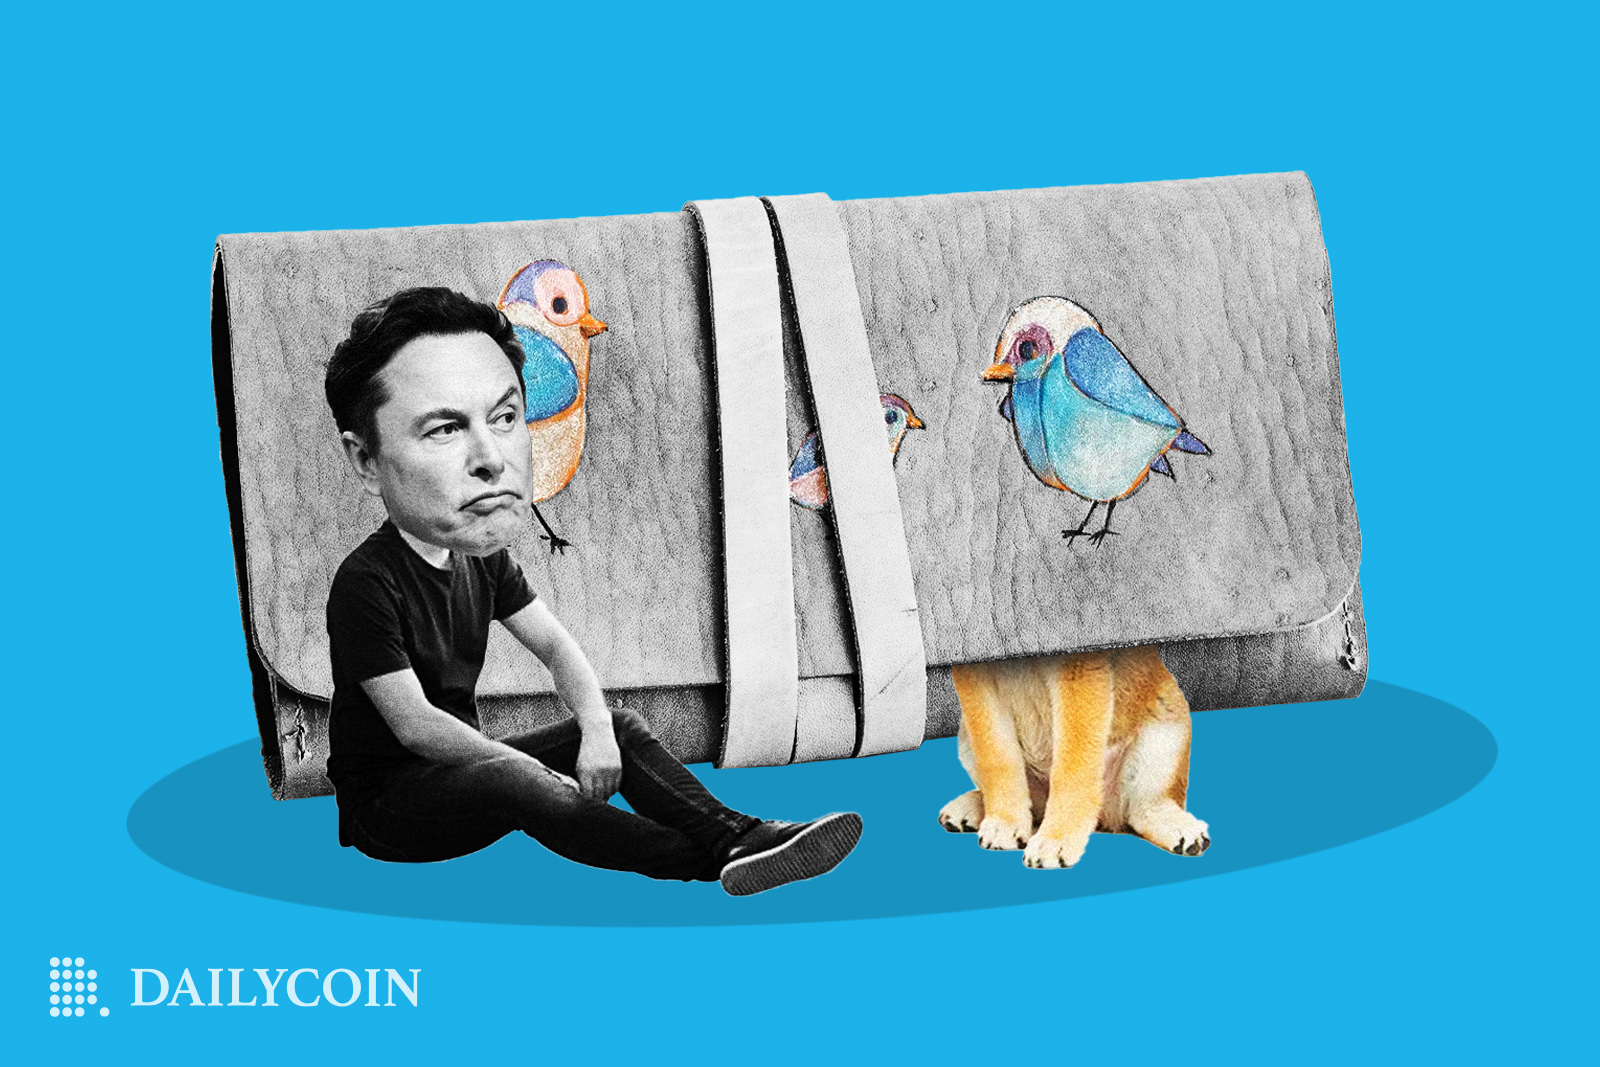 Elon Musk is sitting in front of a big wallet with blue birds on it and Shiba Inu is hiding inside the wallet